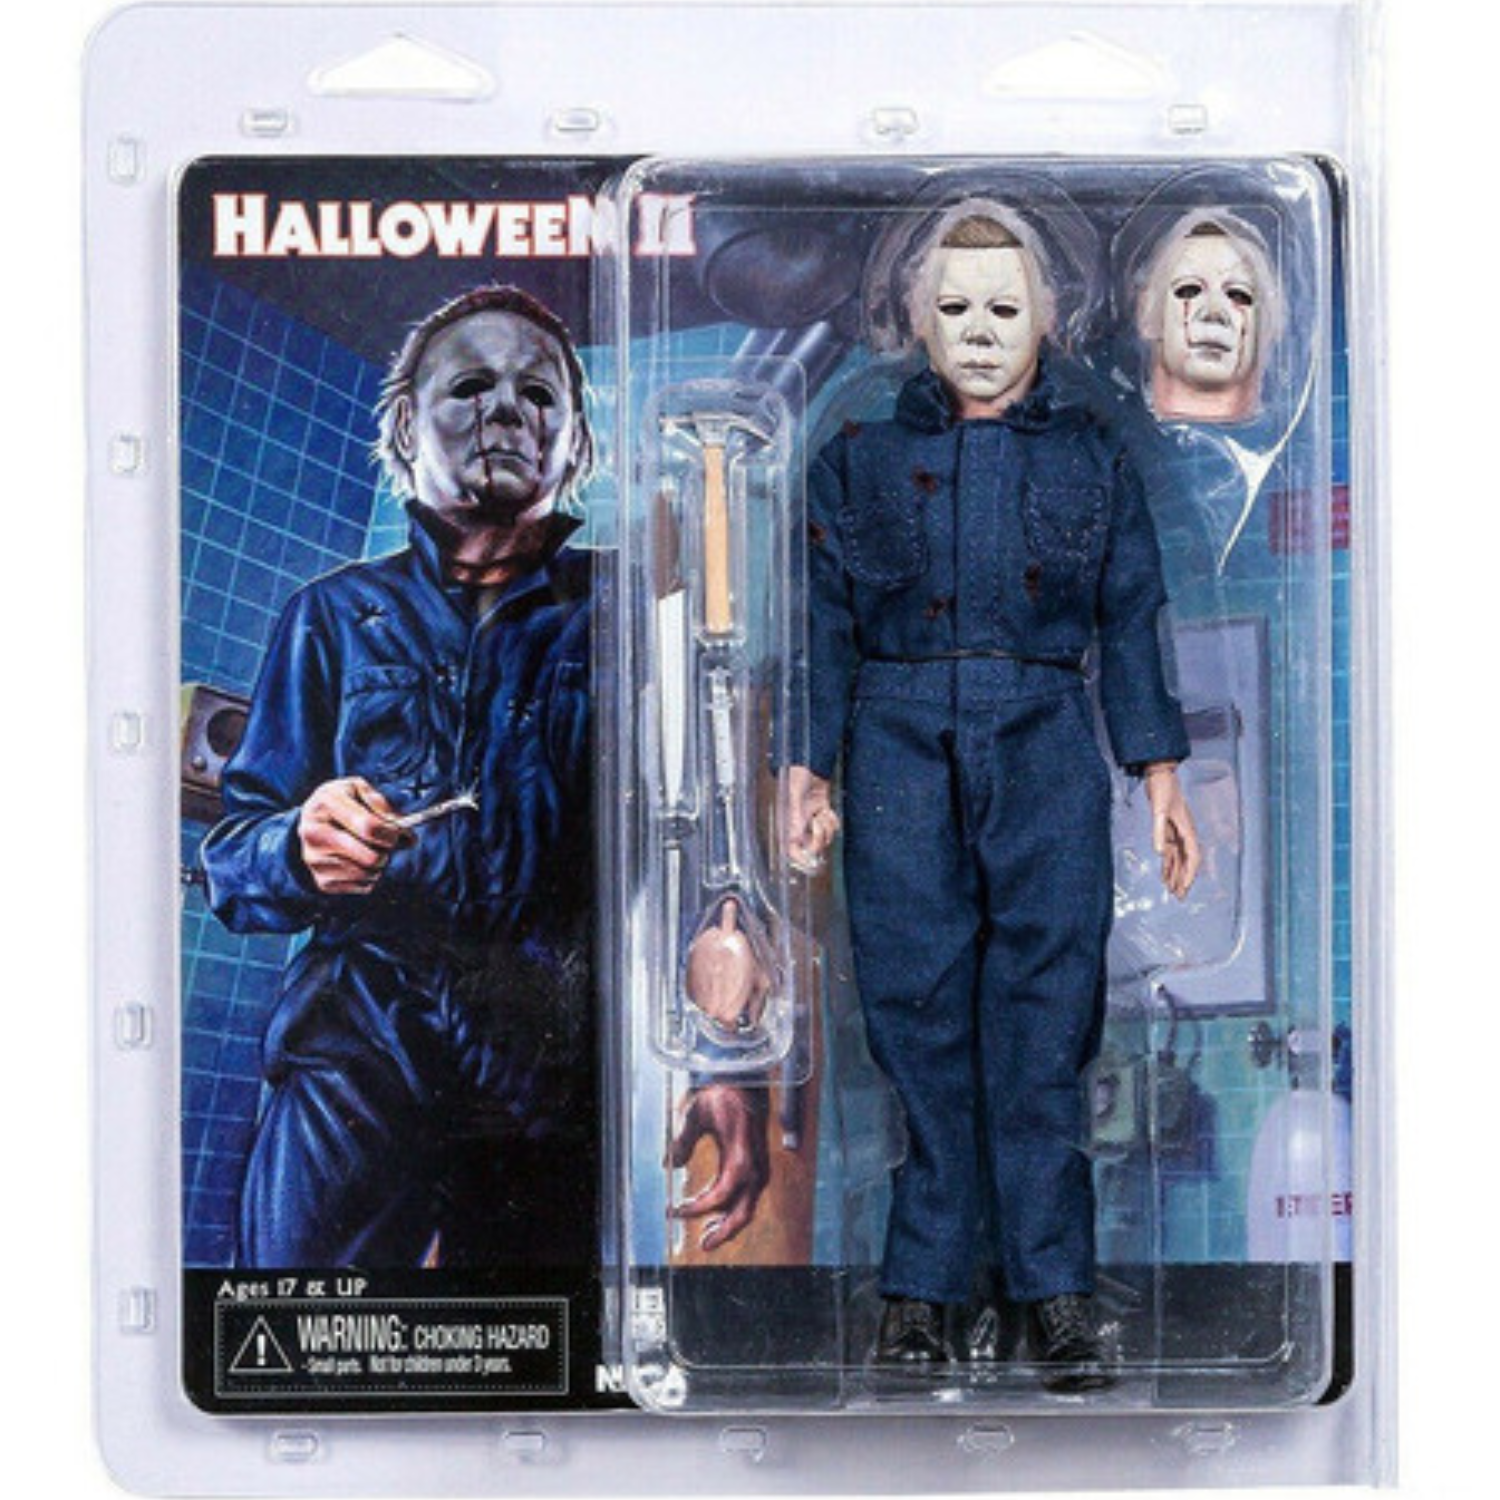 Retro Clothed Action  - Halloween 2 (1981) - 8" Michael Myer